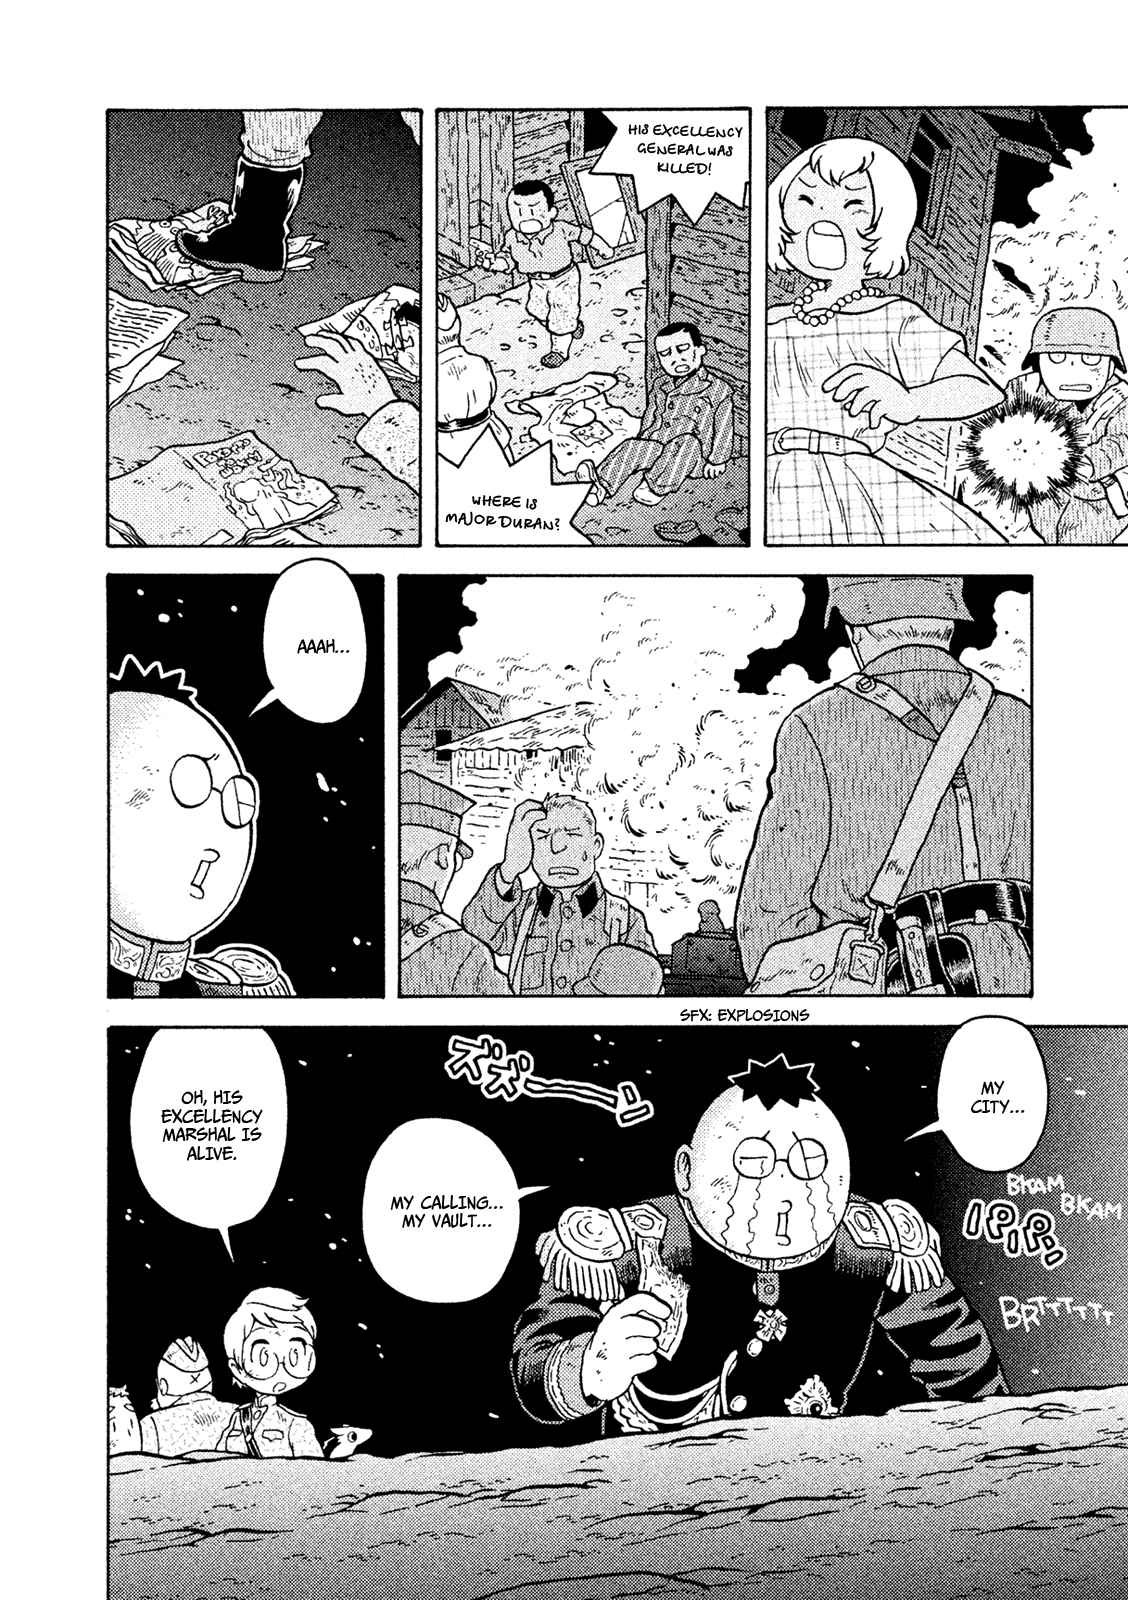 Guns and Stamps Vol. 5 Ch. 42 Closing already?